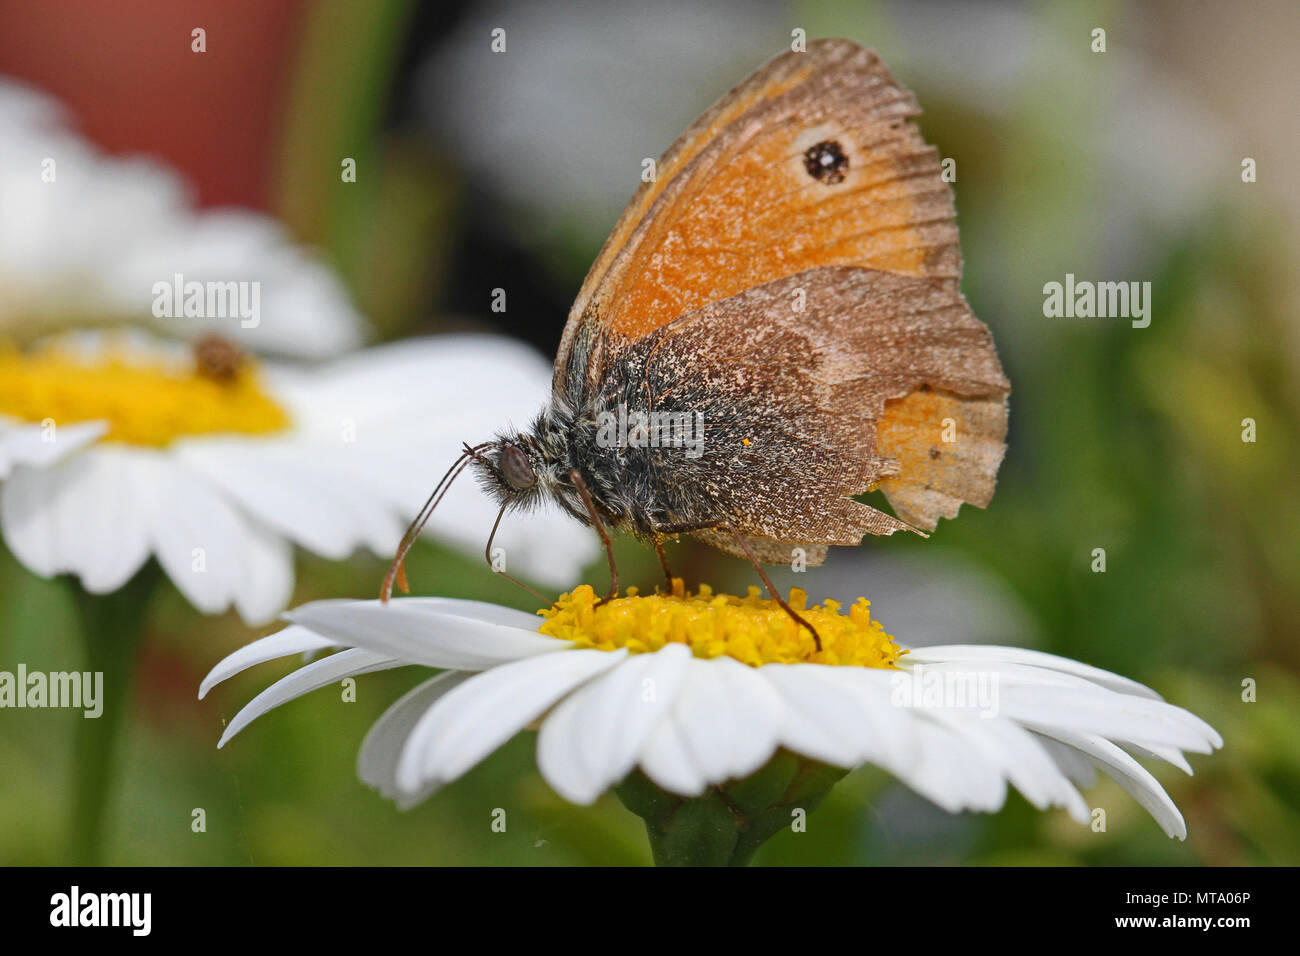 tiny small heath butterfly very close up Latin coenonympha pamphilus feeding on a marguerite or white swan river daisy Latin brachyscome in Italy Stock Photo